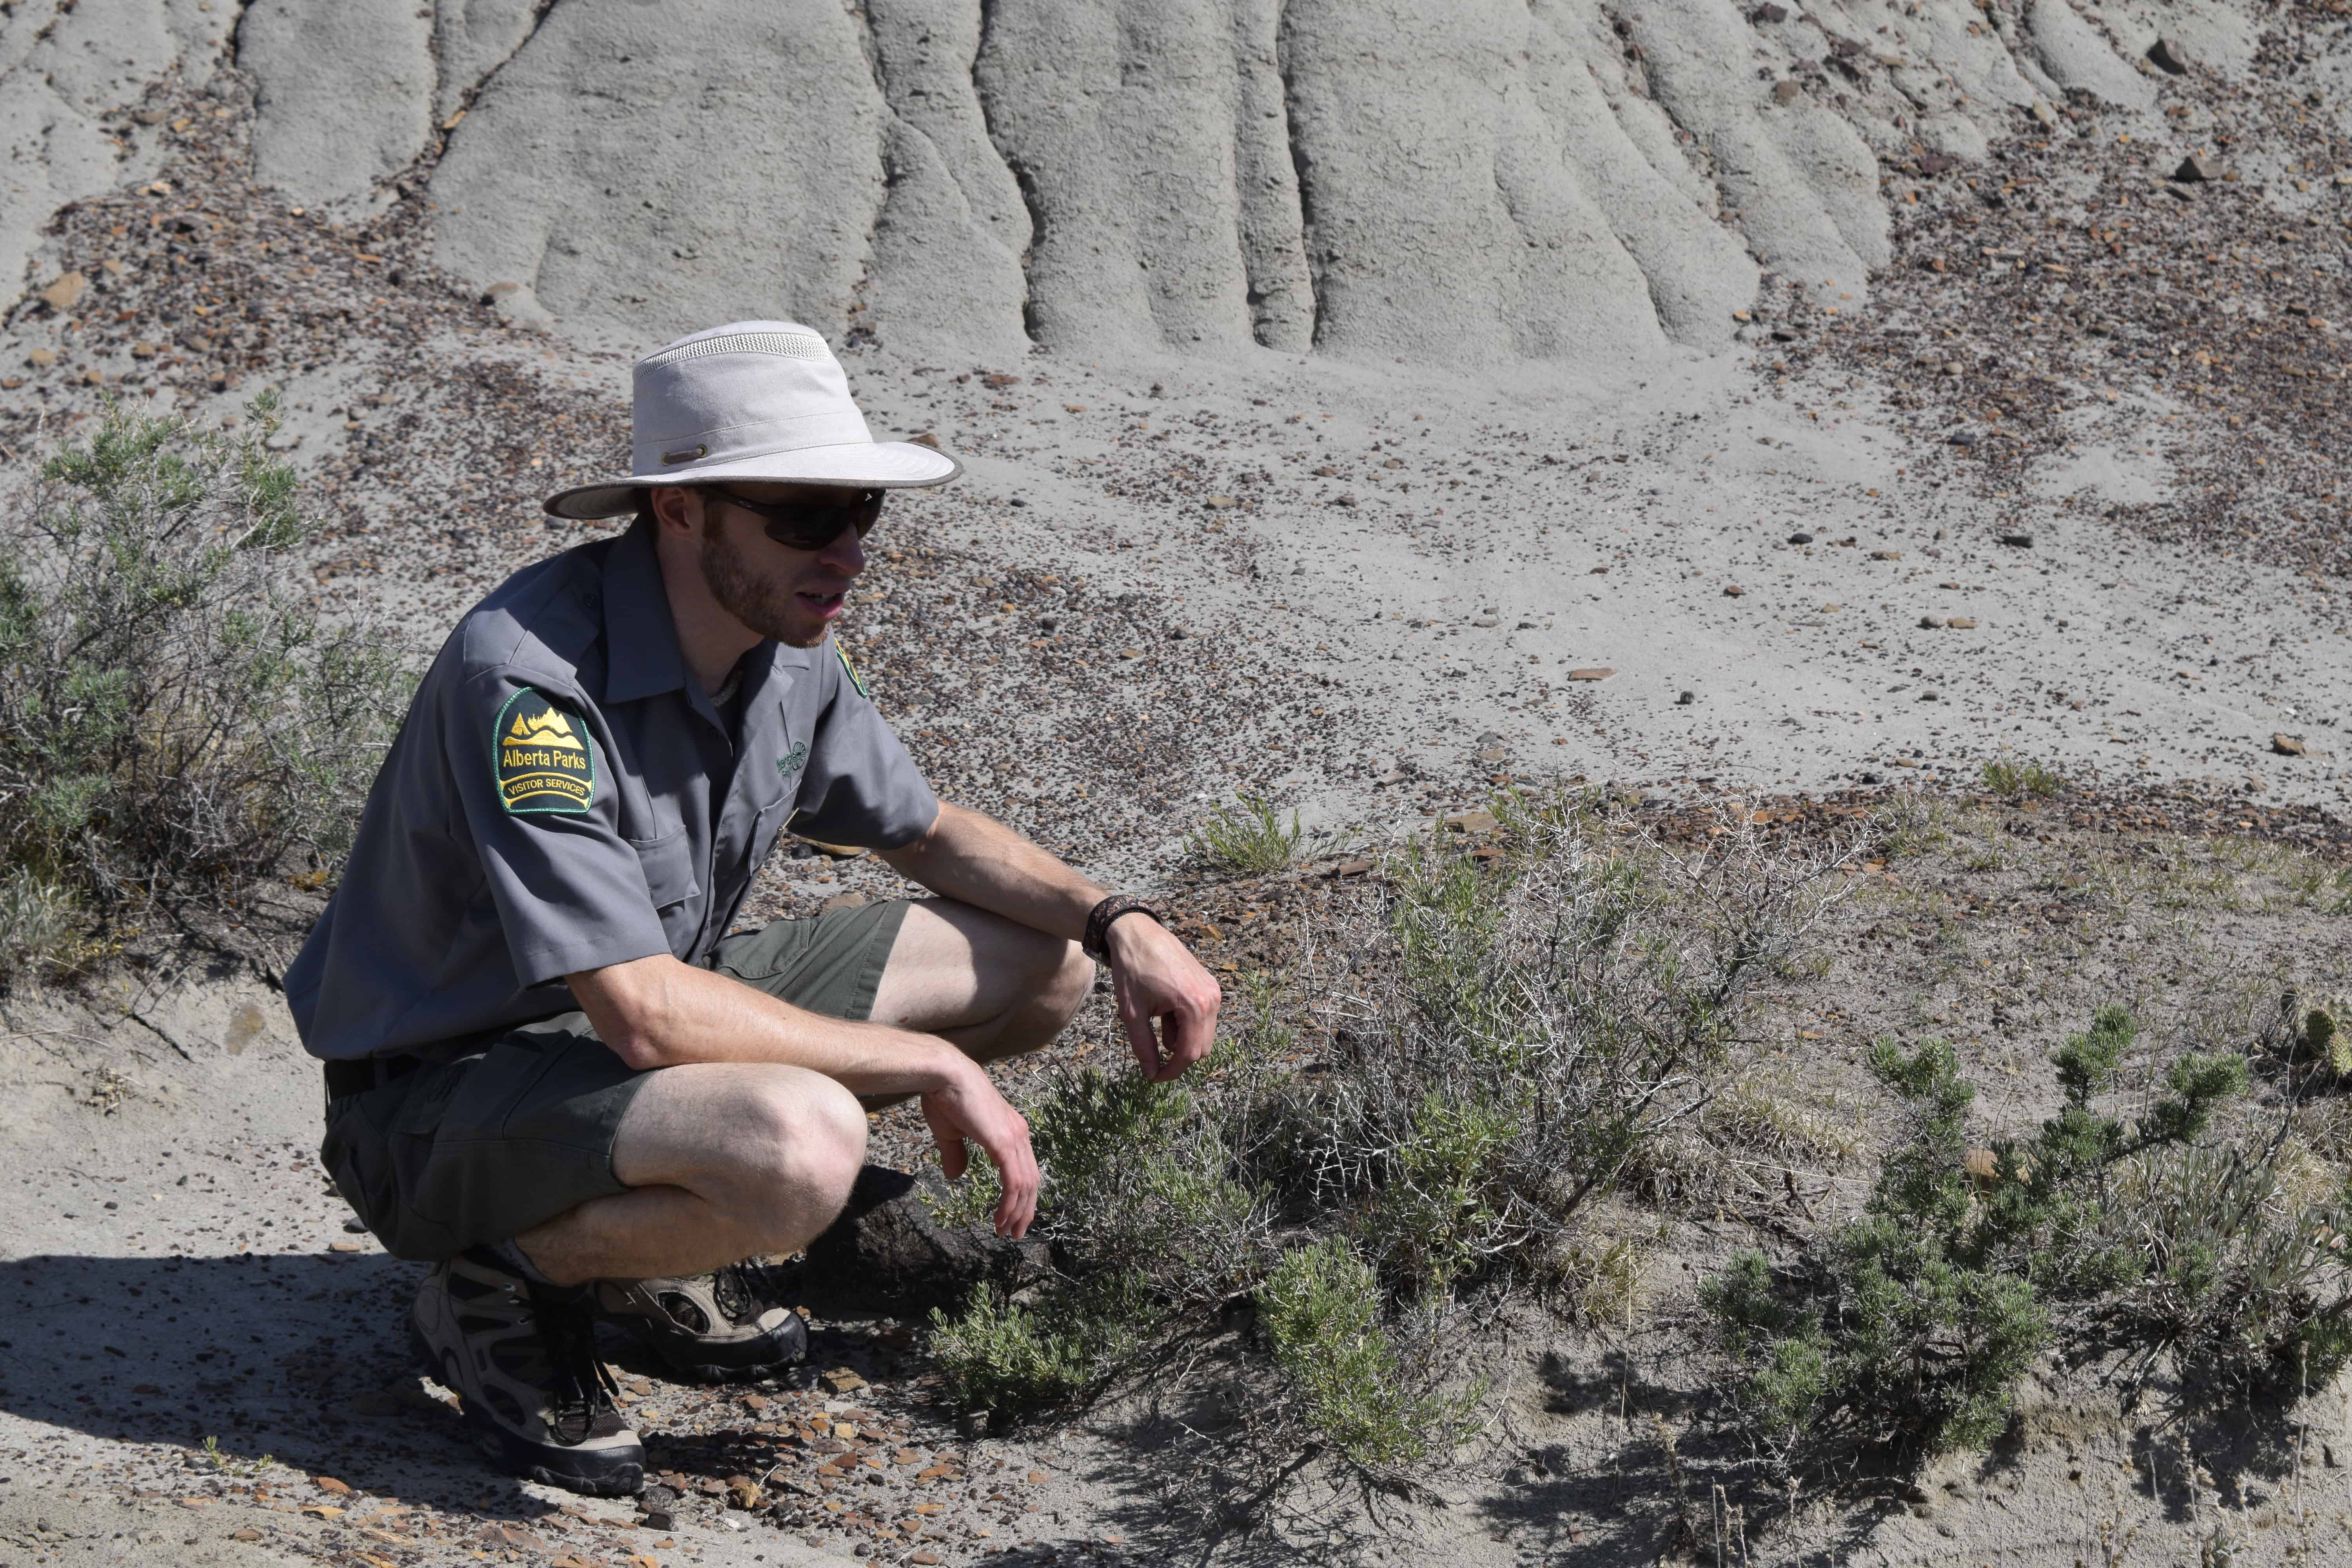 Try This: Bus Tour of the Badlands at Dinosaur Provincial Park